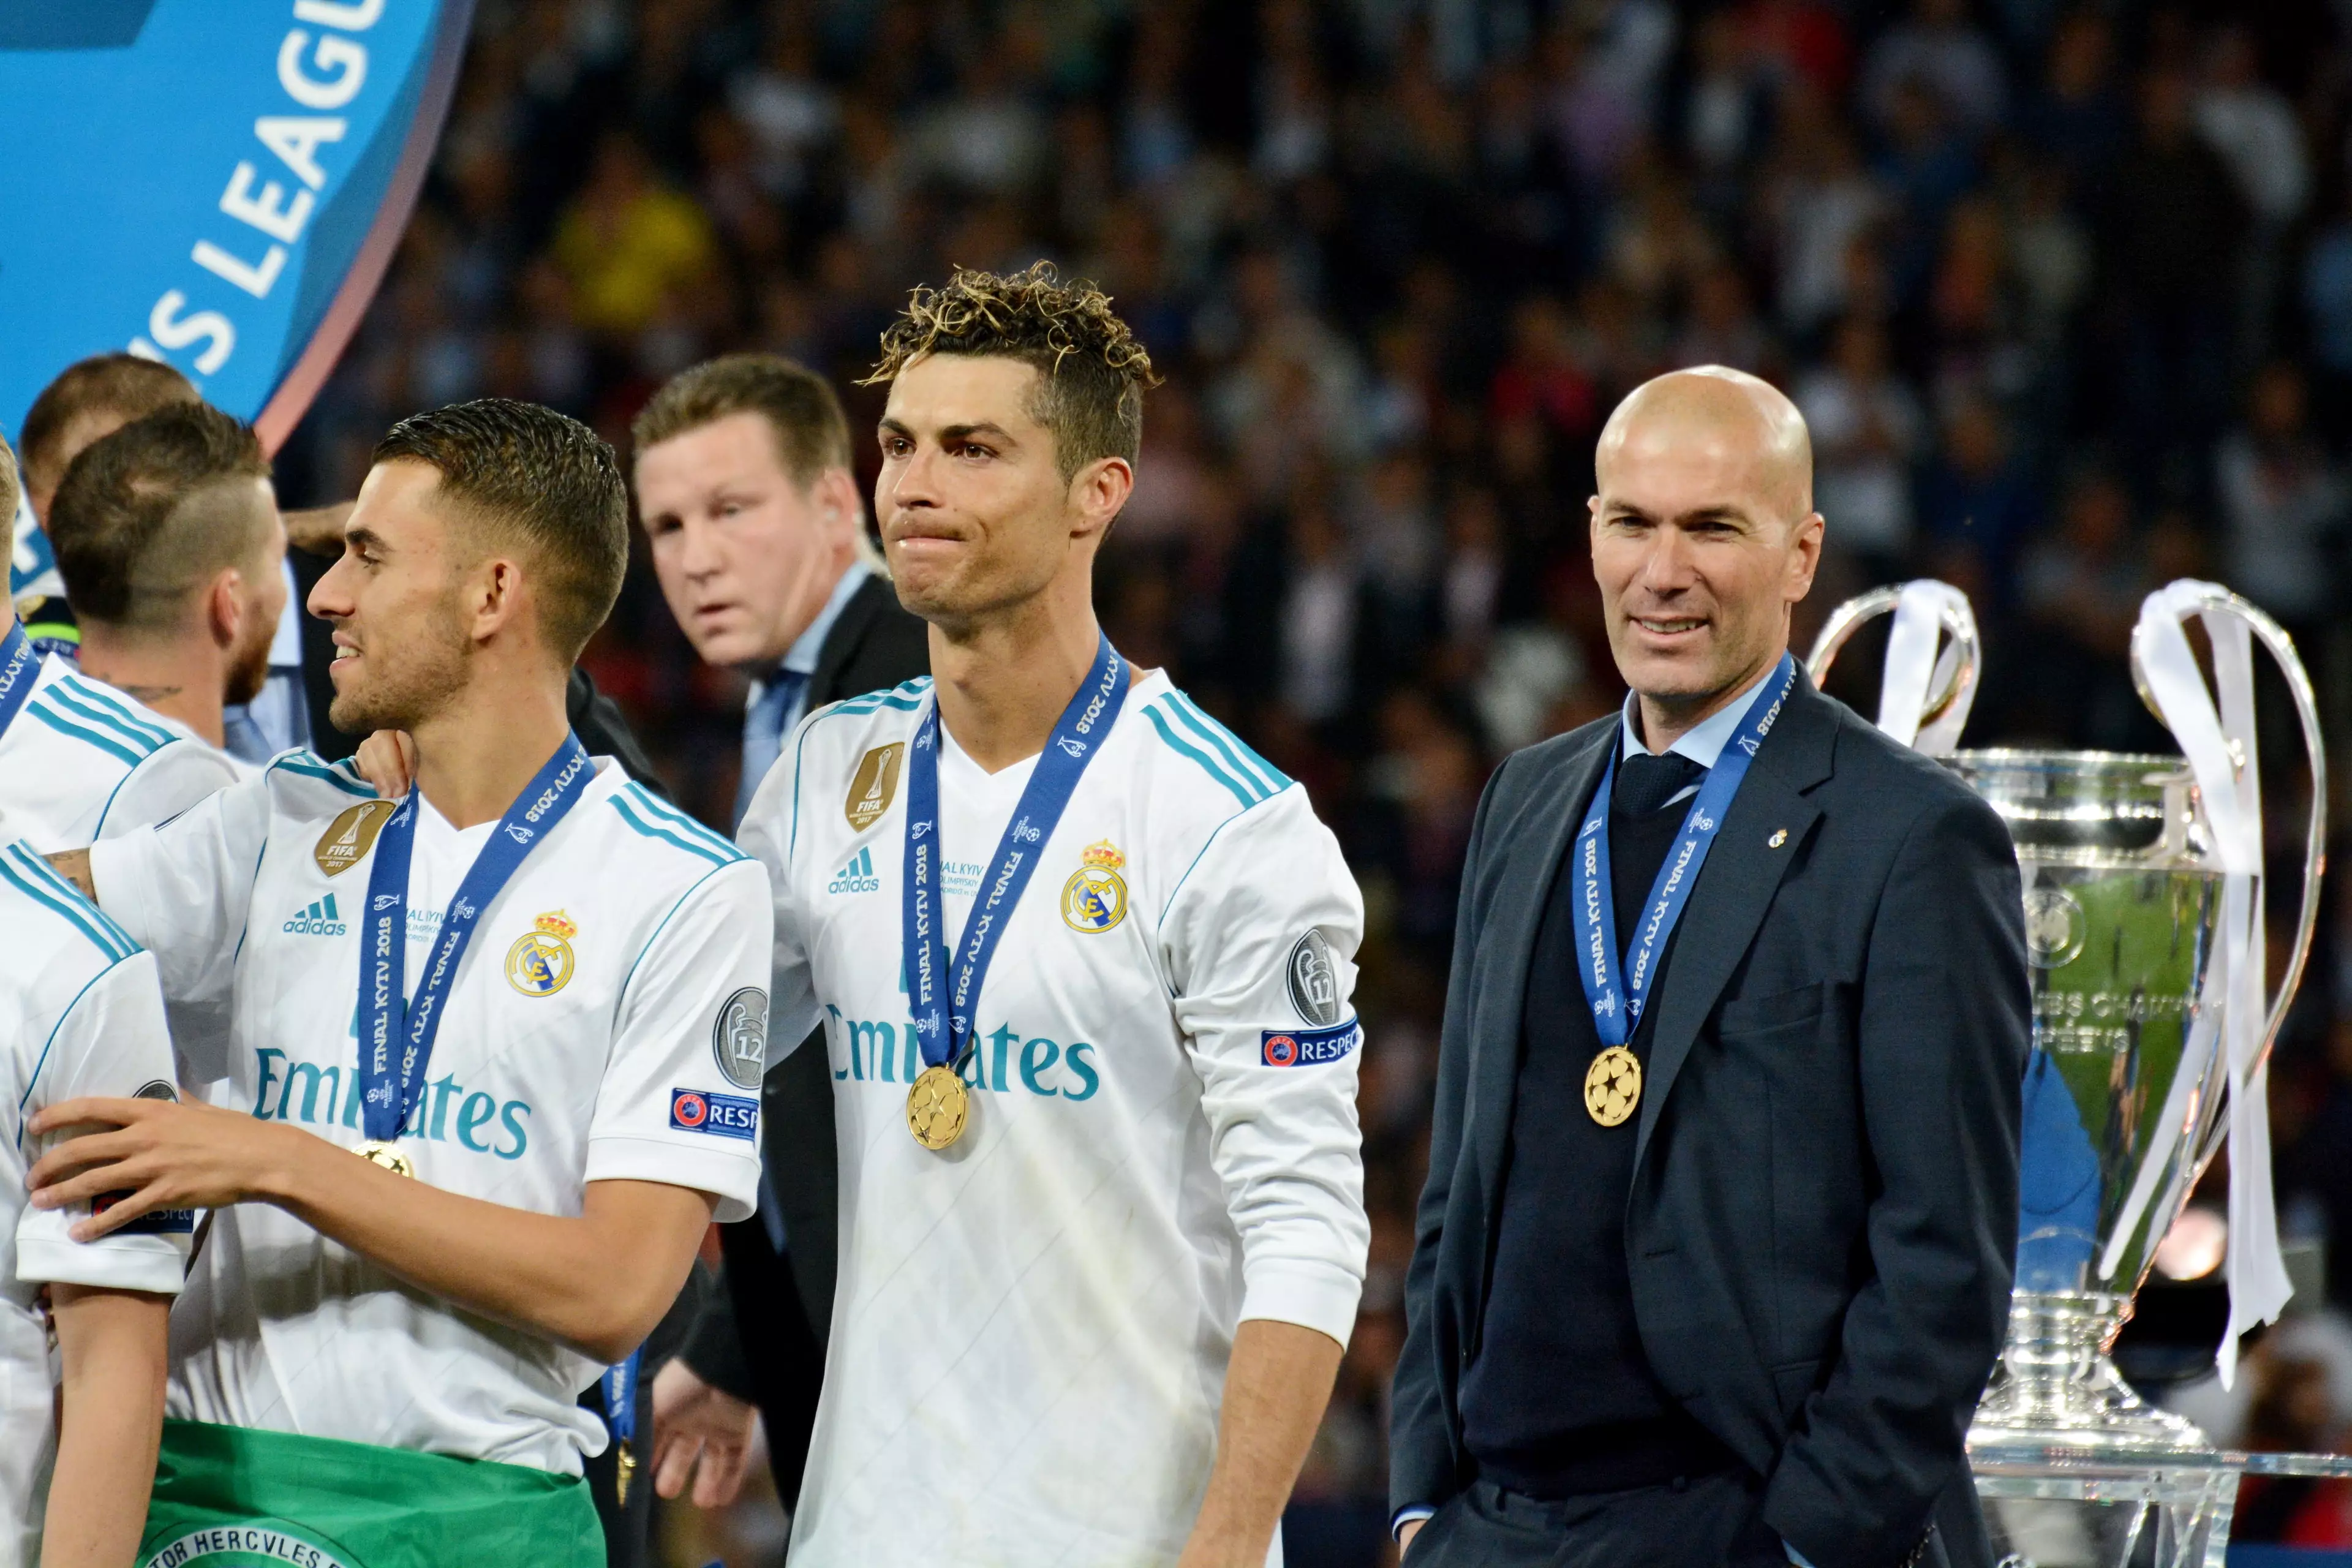 Ronaldo looking weirdly not that happy to win the Champions League. Image: PA Images